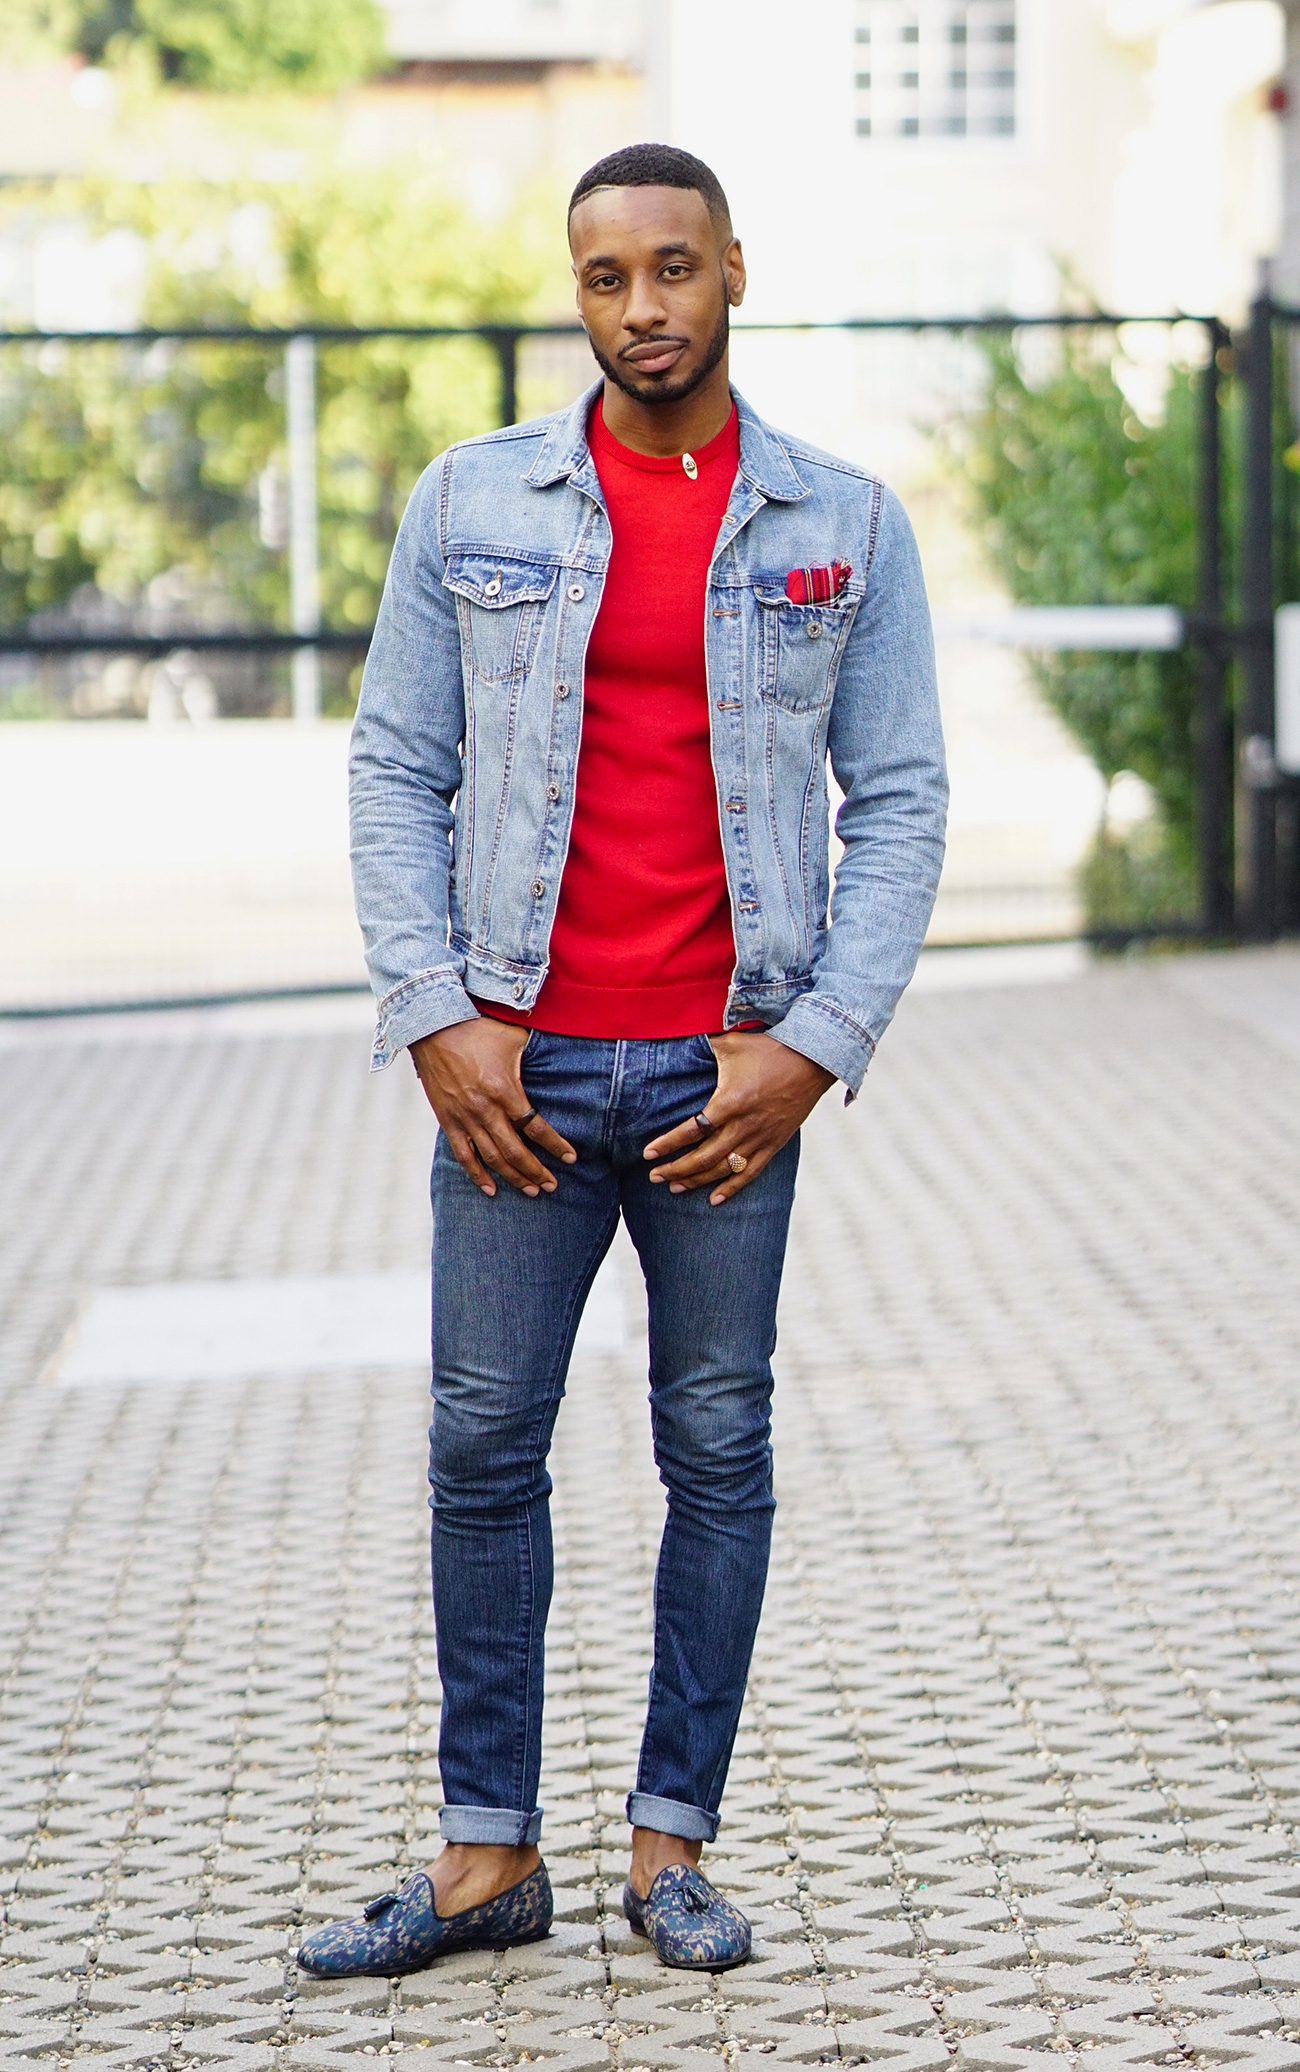 OOTD: CASUAL DENIM OUTFIT WITH LOAFERS 